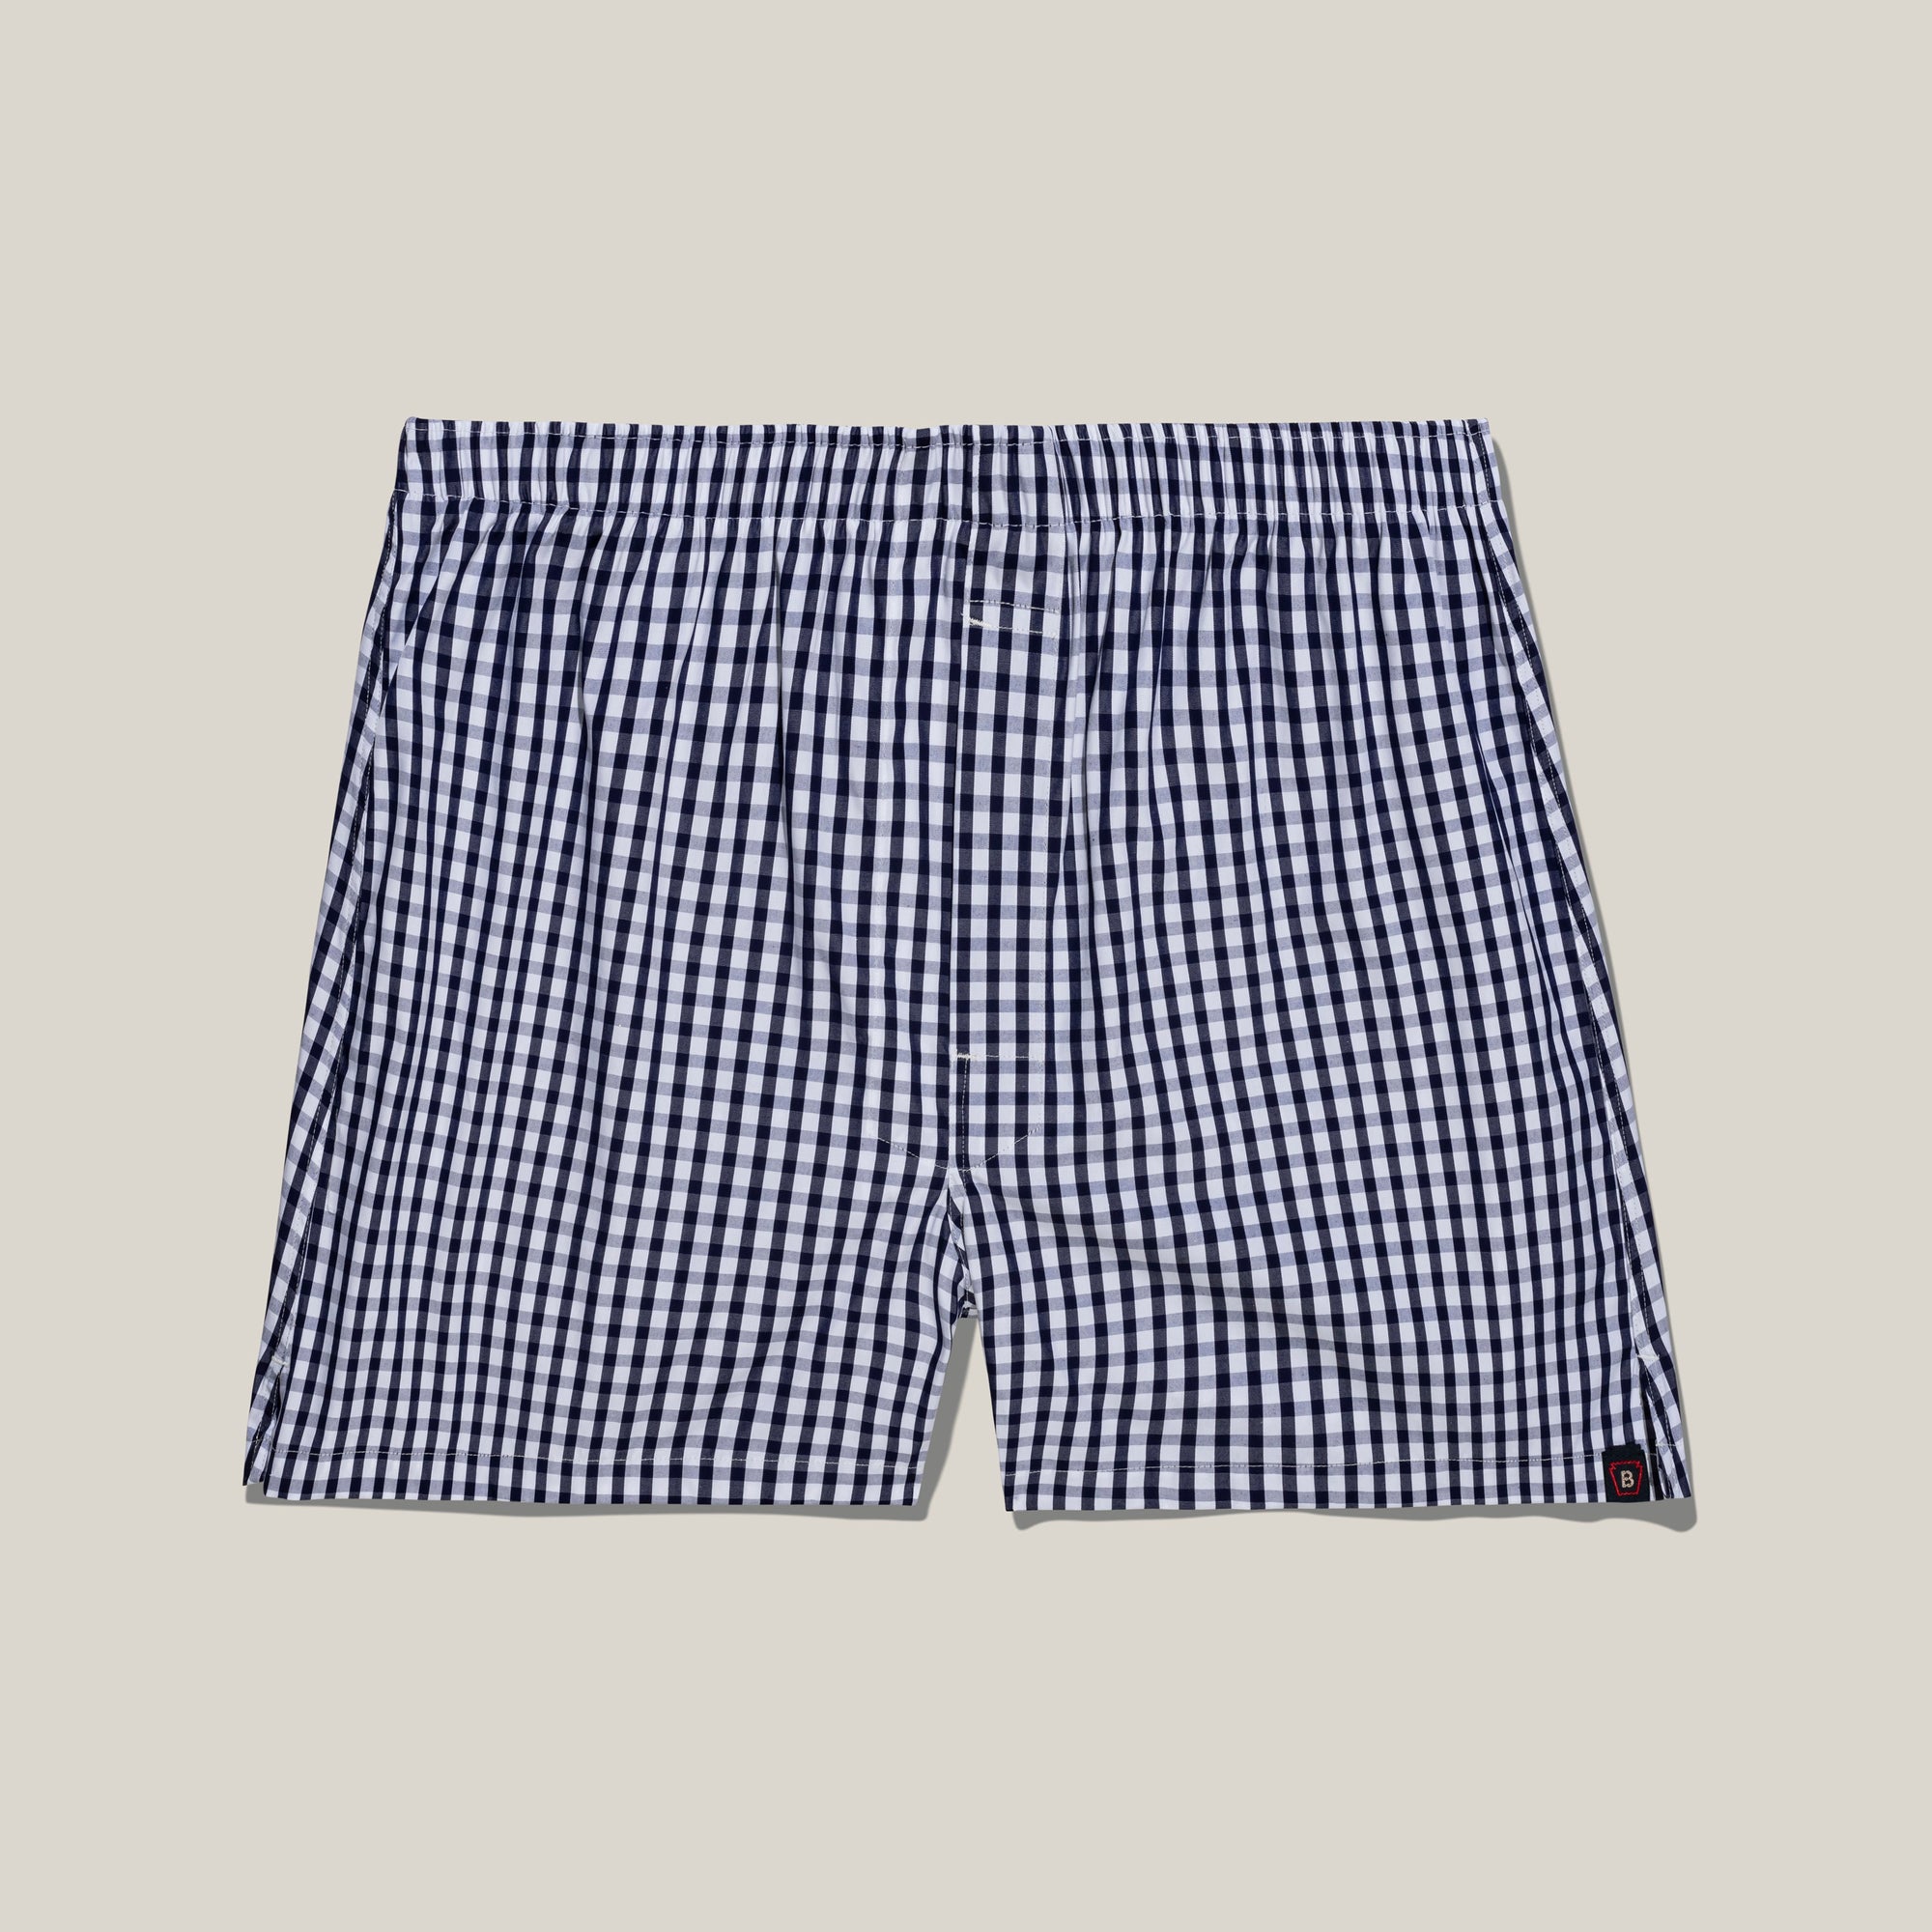 Plaid Cotton Boxer in Navy and White by Bills Khakis